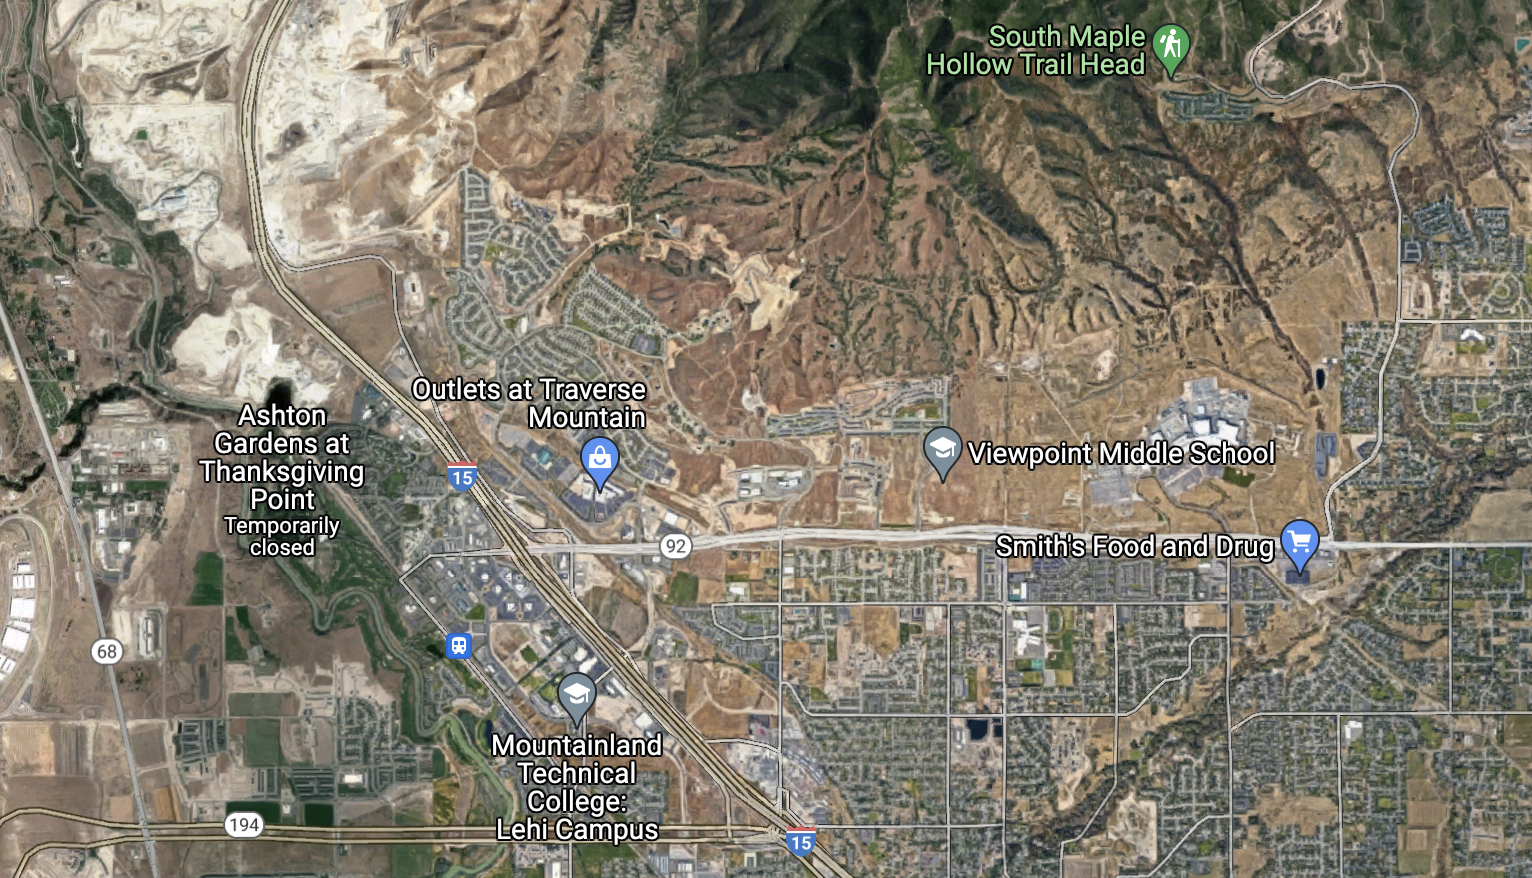 I-15 to be closed in lehi for repairs as seen on map...